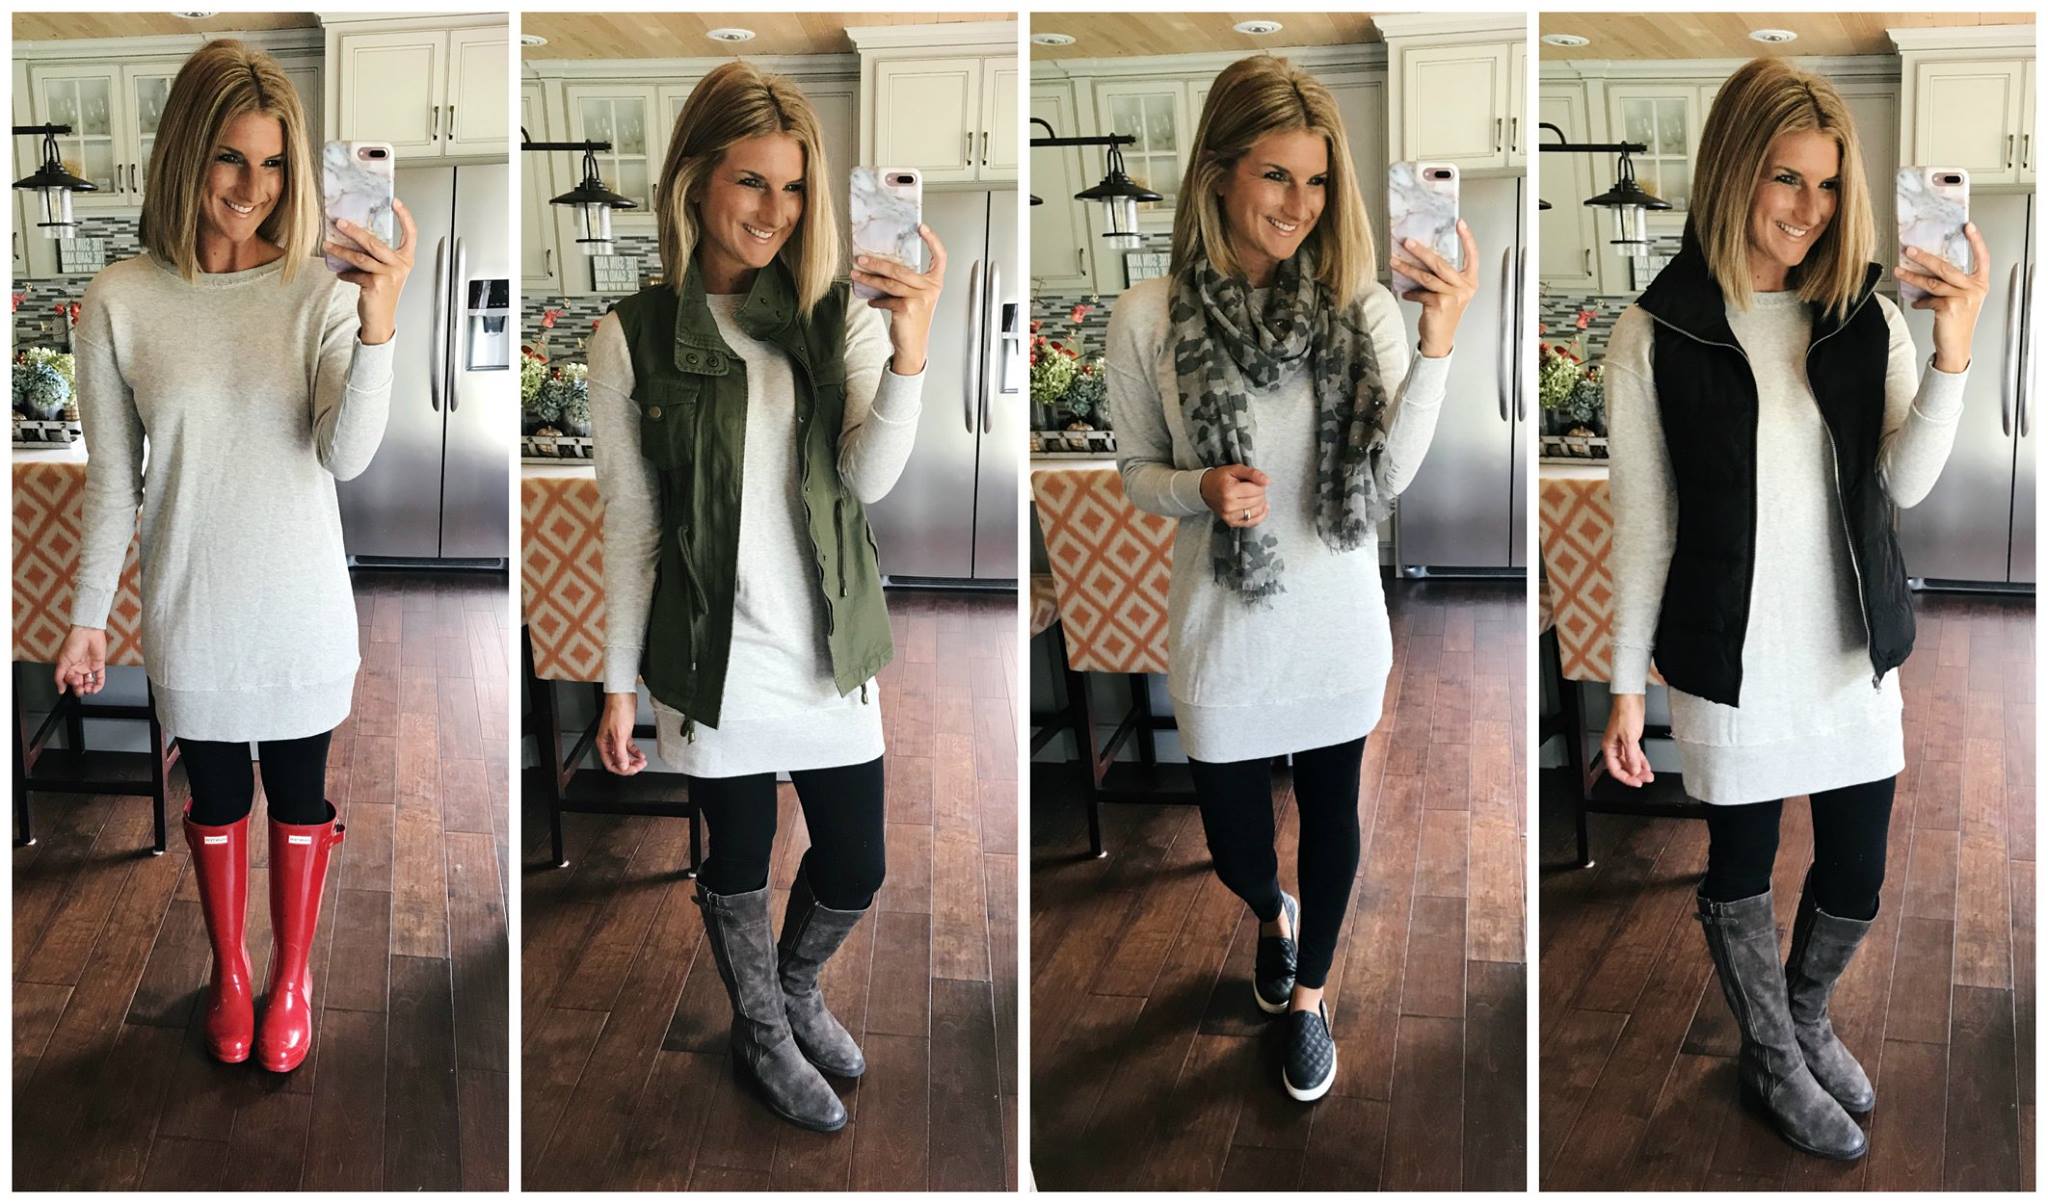 4 ways to style a sweatshirt dress for Fall